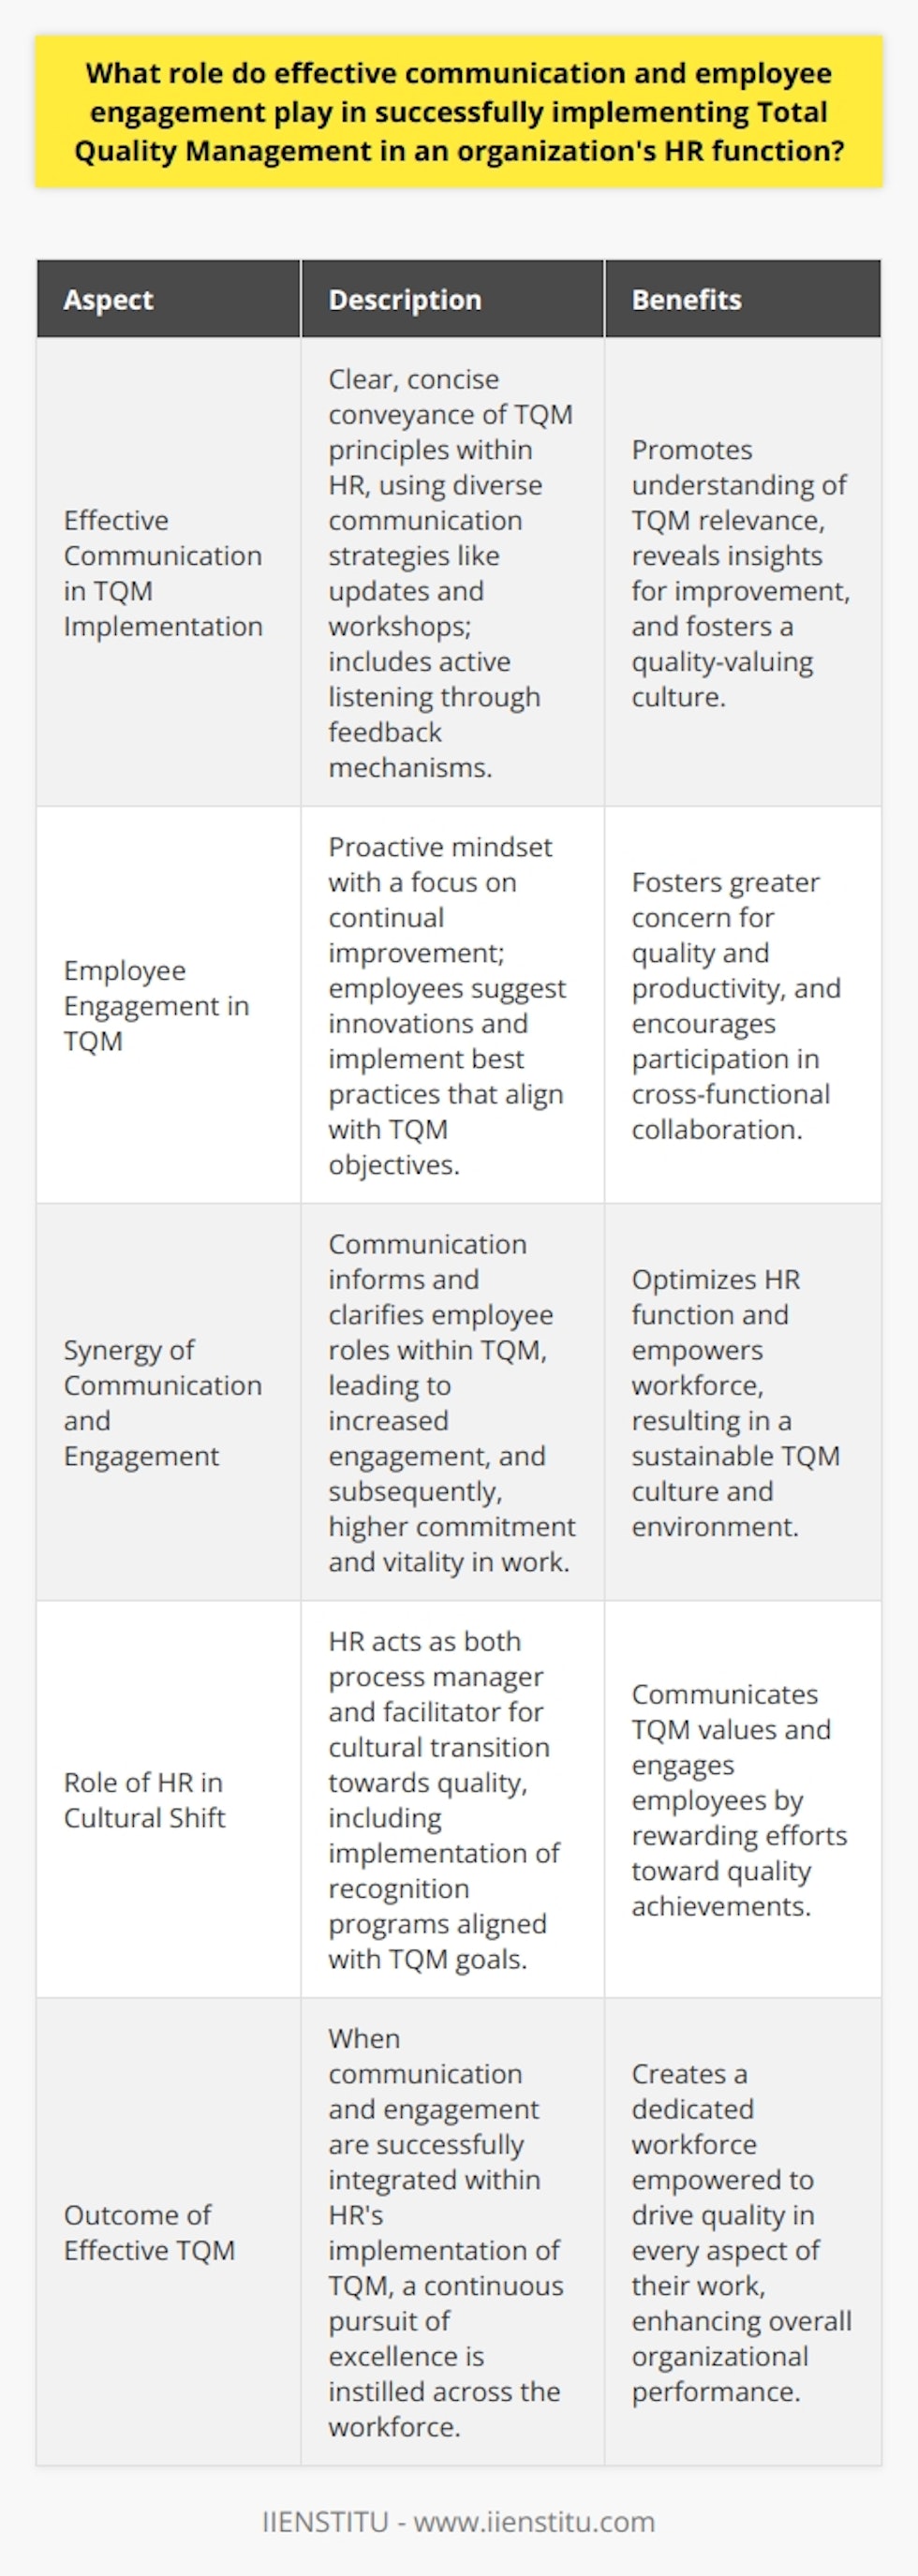 Within the context of Total Quality Management (TQM), both effective communication and robust employee engagement are instrumental in ensuring the successful application and sustainability of TQM practices in a company's HR function.**Effective Communication**When implementing TQM within the HR function, conveying the principles clearly and concisely is essential to ensure that all employees understand the relevance of TQM to their individual roles. The HR function typically serves as the conduit for disseminating TQM tactics and ideologies throughout the organization. Therefore, it must employ communication strategies that resonate across various departments and levels of hierarchy. Regular updates, workshops, training sessions, and inclusive decision-making forums can be beneficial to keep the lines of communication open. This does not just entail speaking but also listening—thus, feedback mechanisms are a key component of effective communication within TQM. This two-way dialogue can reveal insights into potential systemic improvements and foster a culture where employees feel their contributions to quality are valued.**Employee Engagement**Highly engaged employees tend to exhibit a greater concern for quality, productivity, and the overall success of the business. Involvement in TQM requires a mindset that is proactive and focused on continual improvement. Employees who are engaged are more likely to take initiative, suggest innovations, and implement best practices that align with TQM objectives.Moreover, employee engagement catalyzes the formation of cross-functional teams that are crucial for TQM. These teams enable collaboration and knowledge sharing, which underpins the principle of integration inherent to TQM methodologies. **Synergy Between Communication and Engagement**The synergy between effective communication and high levels of employee engagement is the cornerstone of TQM in HR. Effective communication ensures that employees are informed and understand the importance of their role within the TQM framework — this clarity and inclusion, in turn, boost their engagement. When employees are engaged, they bring vitality and commitment to their work, which optimizes the HR function and, by extension, the entire organization.Additionally, within TQM, HR serves not only as a manager of processes but also as a facilitator for the cultural shift toward total quality. This includes recognition programs that highlight the exceptional work aligned with TQM goals, which serves to communicate values and further engage employees by showing that efforts toward quality are acknowledged and rewarded.In essence, the intersection of effective communication and employee engagement within the HR function breeds a fertile ground for TQM to flourish. Organizations that actively promote these two elements as part of their TQM strategy in HR are likely to craft an environment shaped by the continuous pursuit of excellence and a workforce that is both dedicated and empowered to drive quality in every aspect of their work.